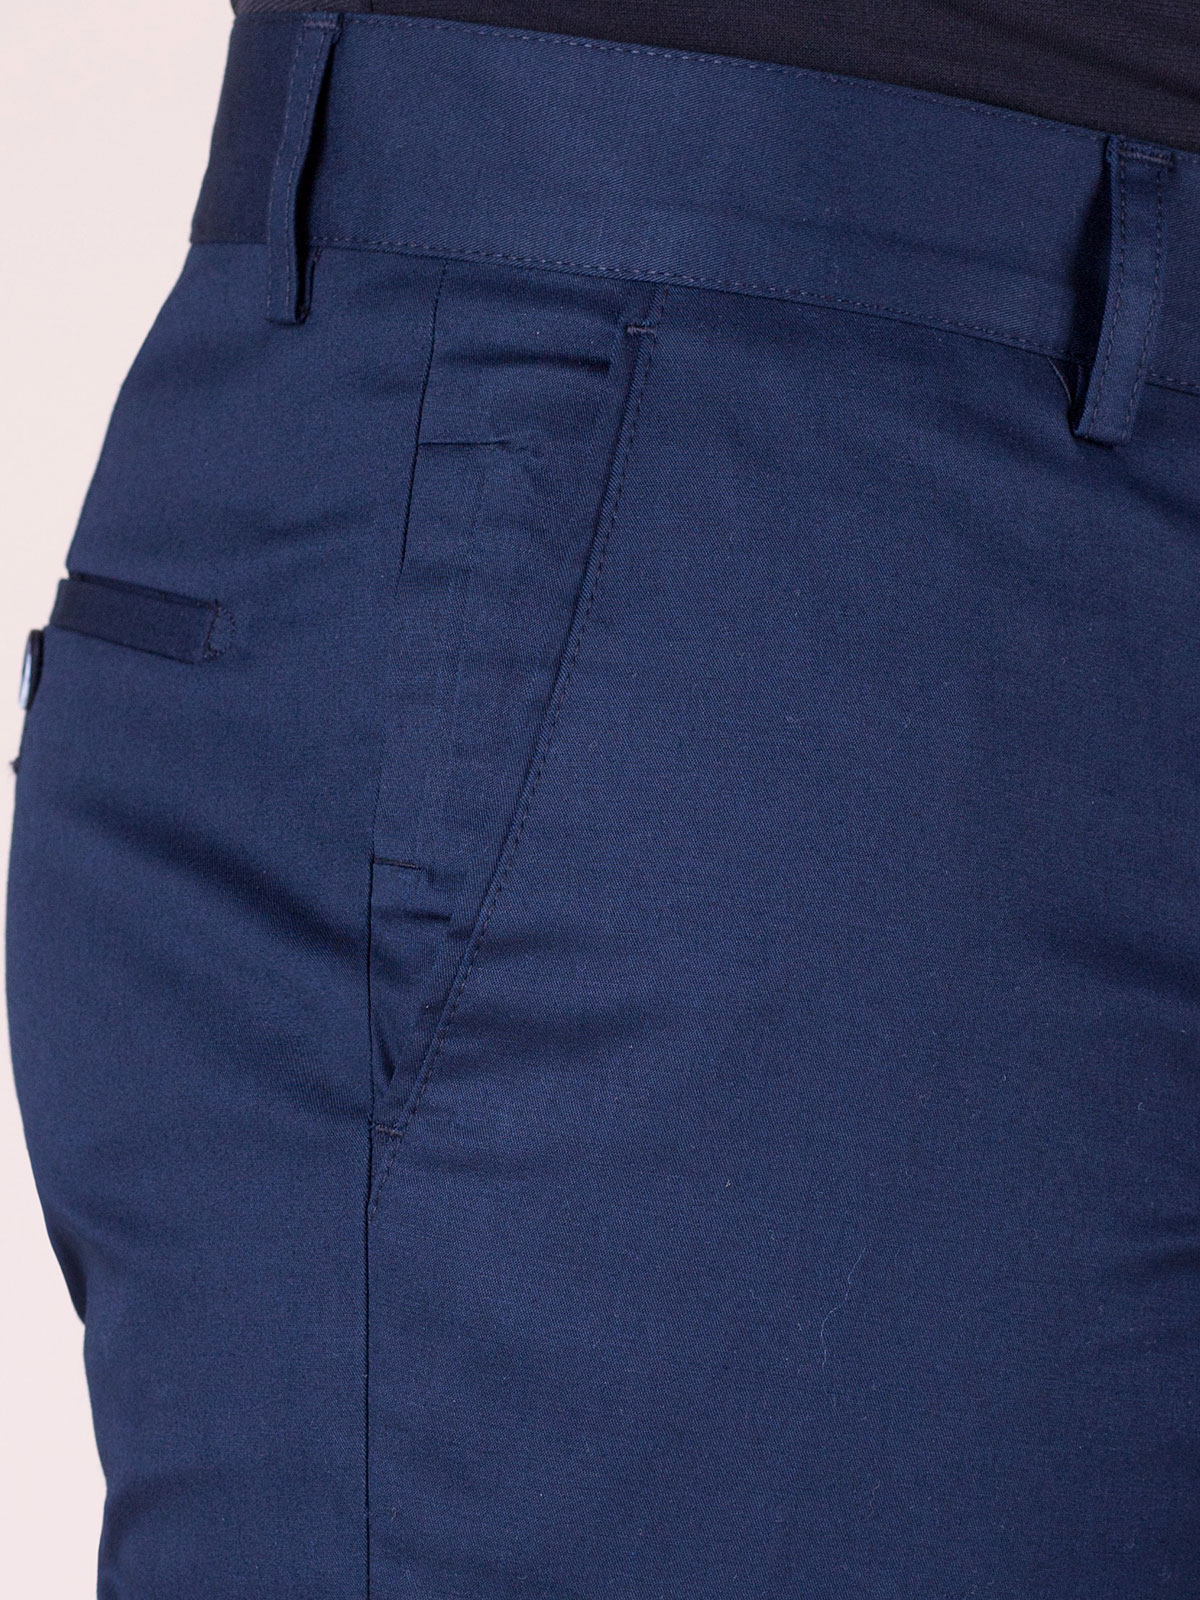 Trousers in dark blue with fitted silho - 60244 € 14.06 img3